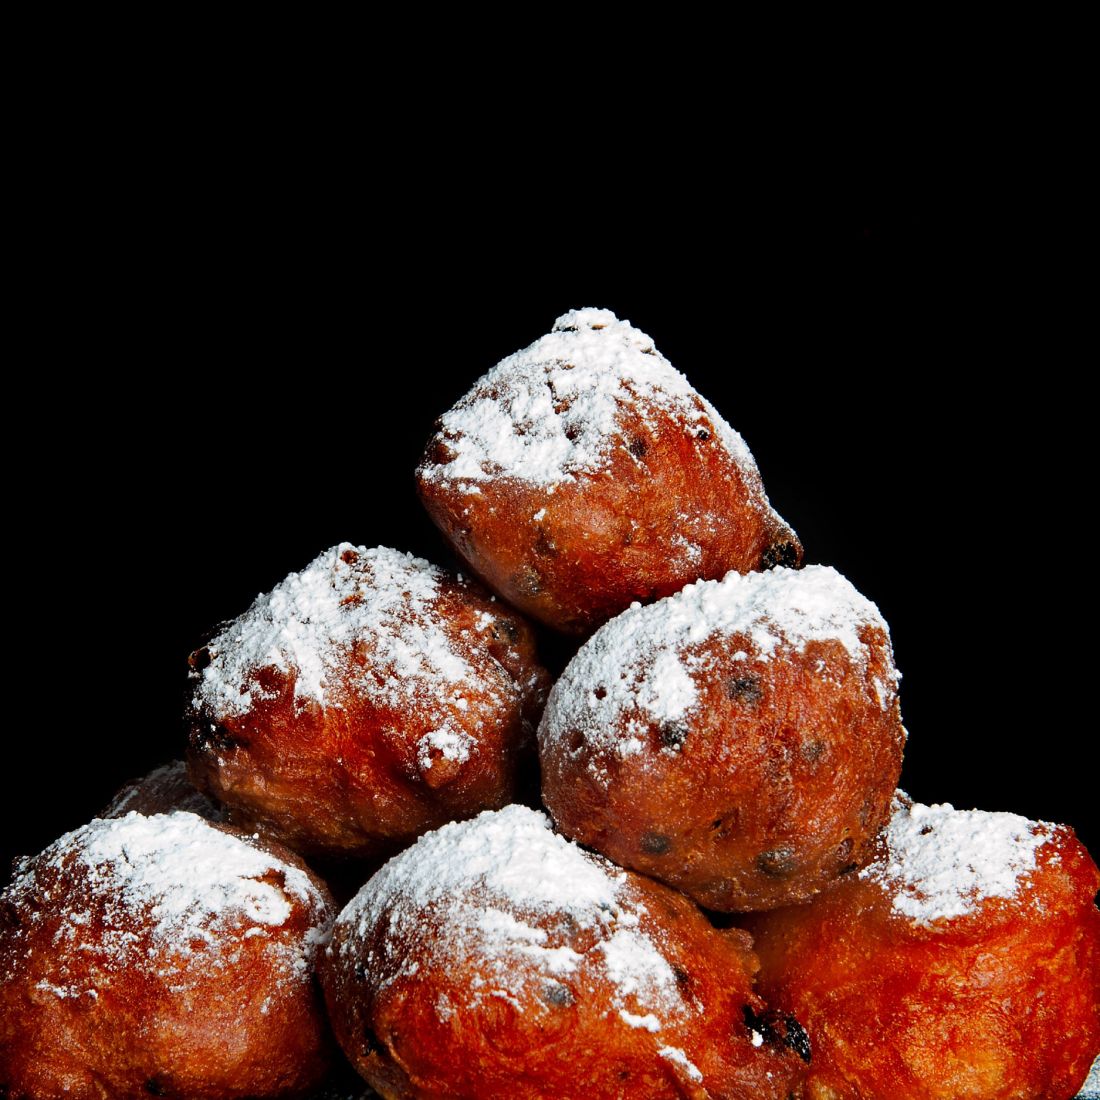 Our oliebollen promotion 